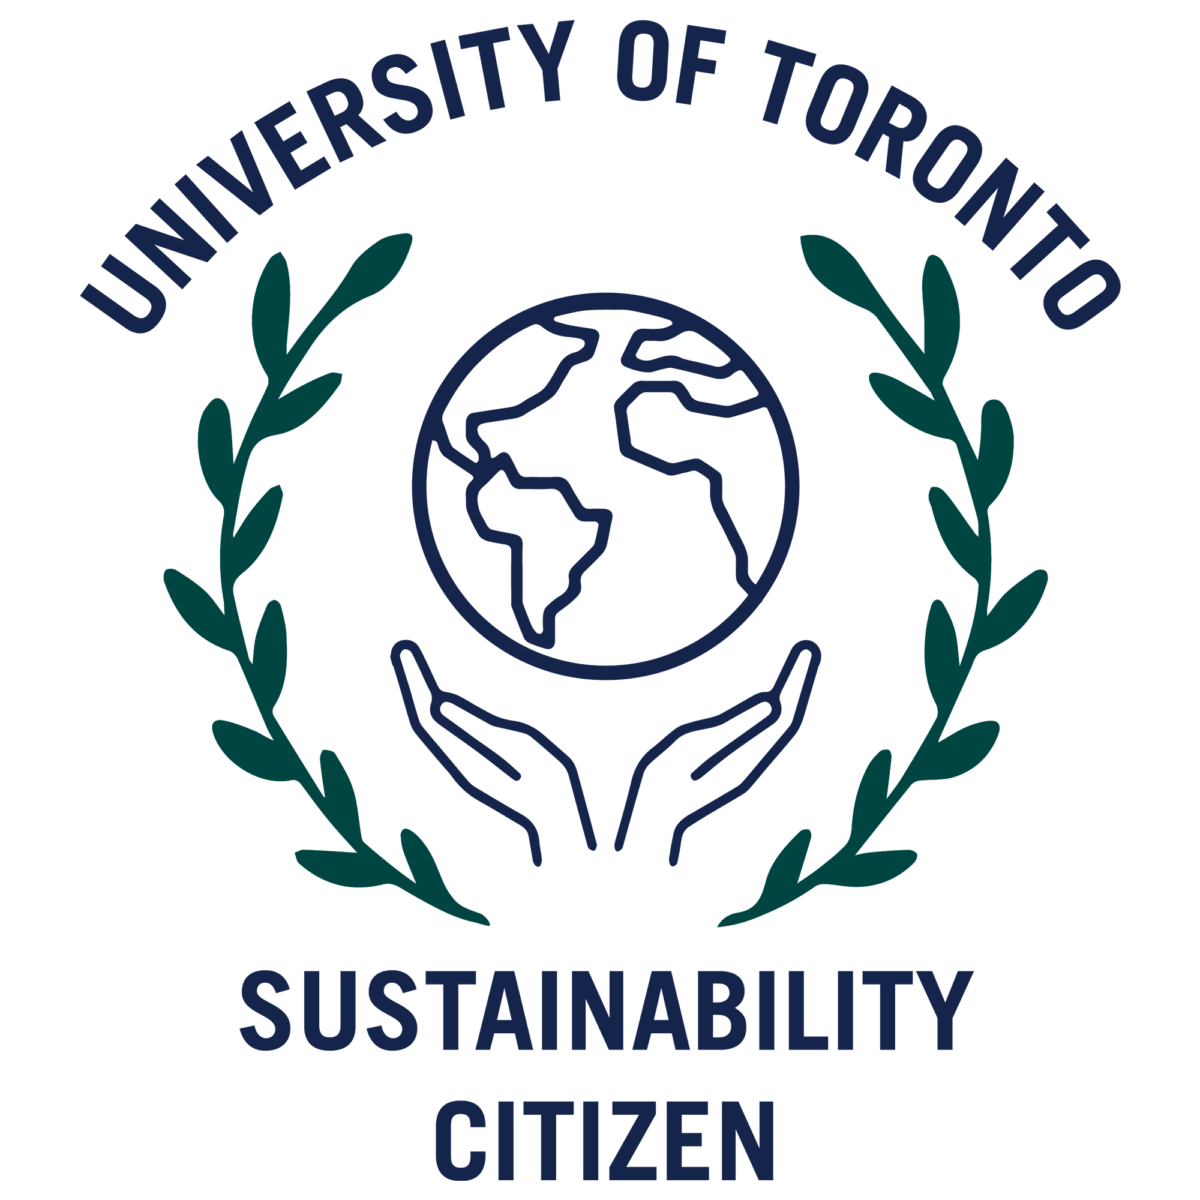 Sustainability Citizen logo, showing two hands under planet Earth